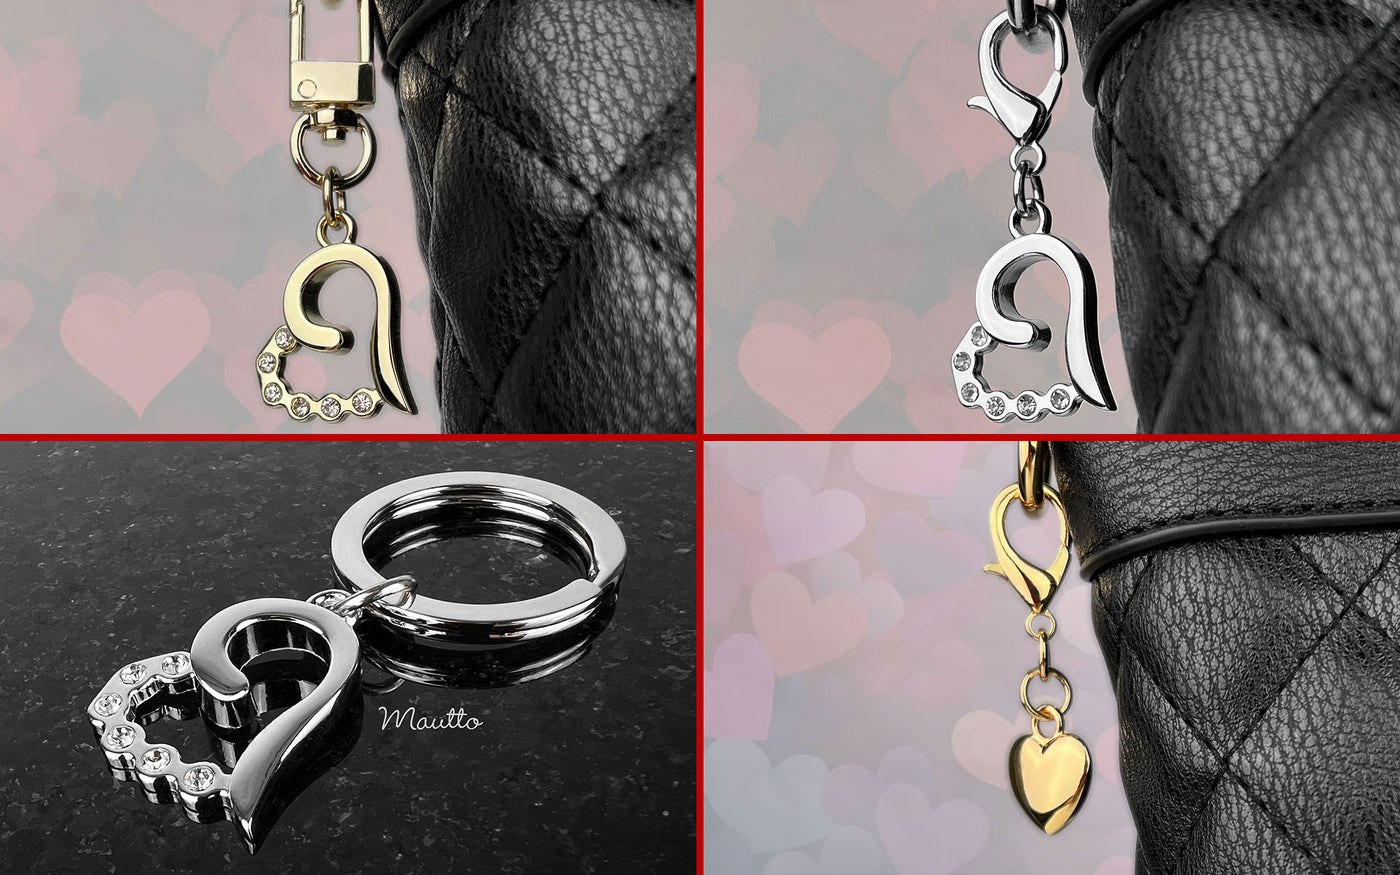 Photos of gold and silver heart charms for accessorizing.